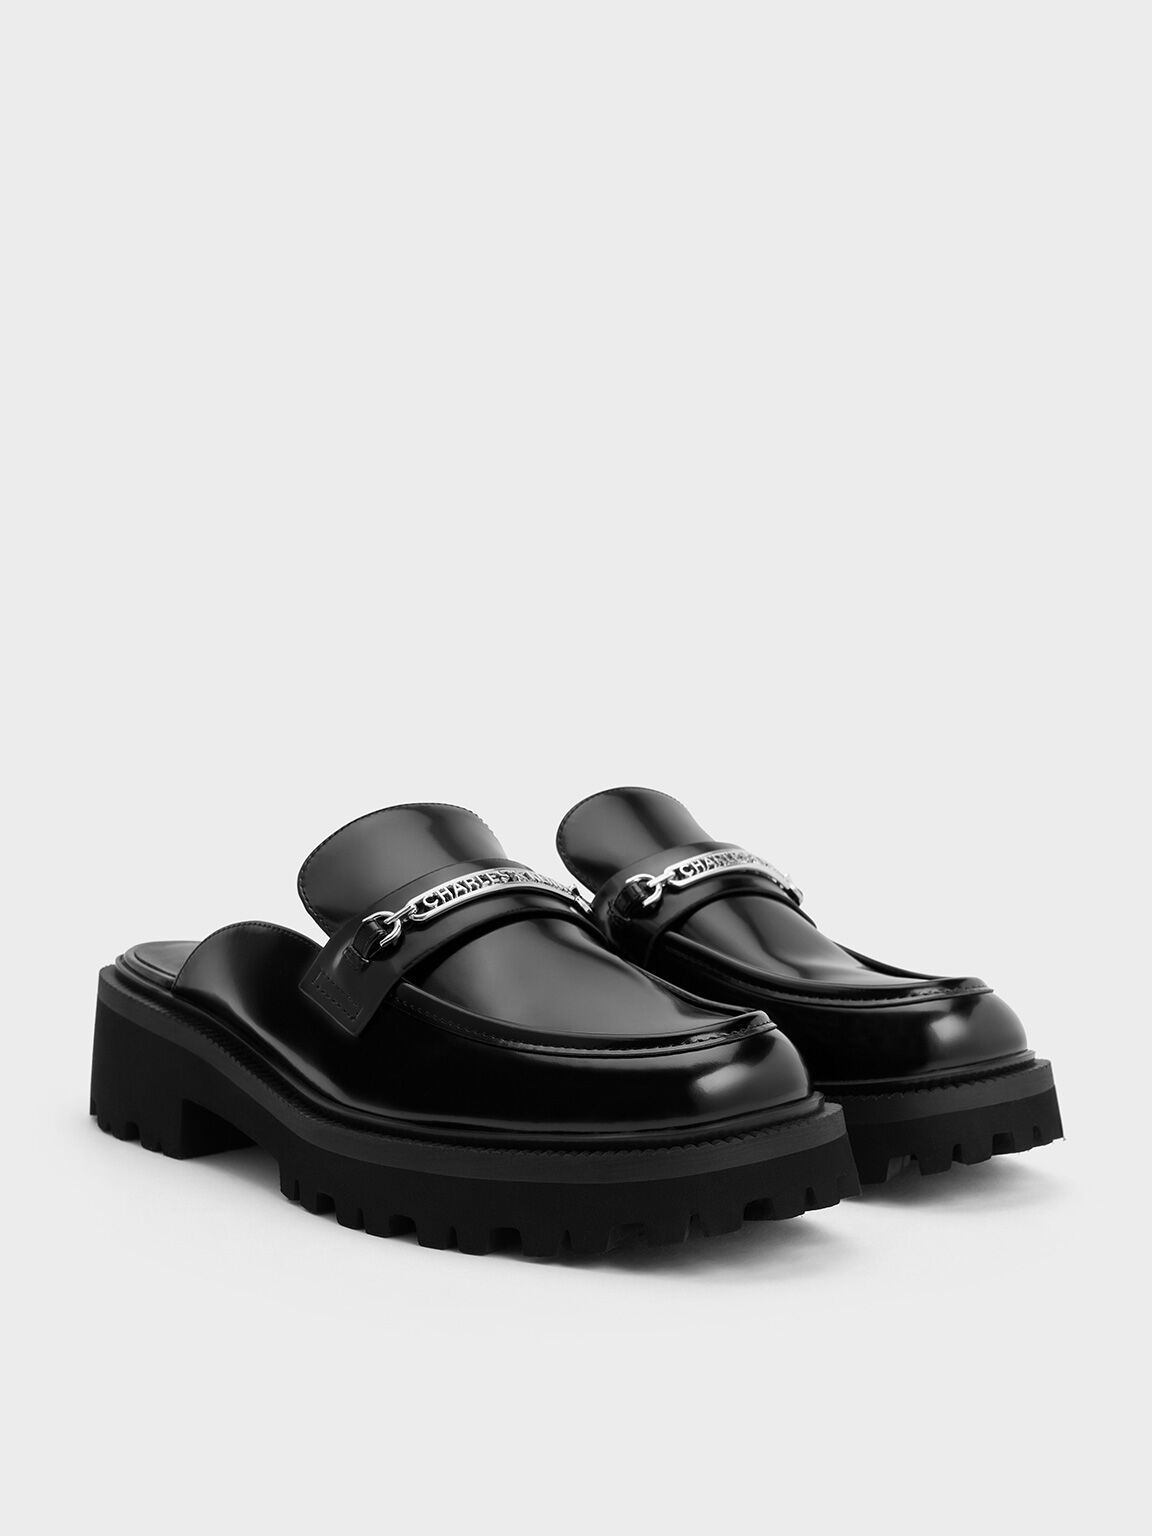 Remy Metallic-Accent Loafer Mules, Black Box, hi-res